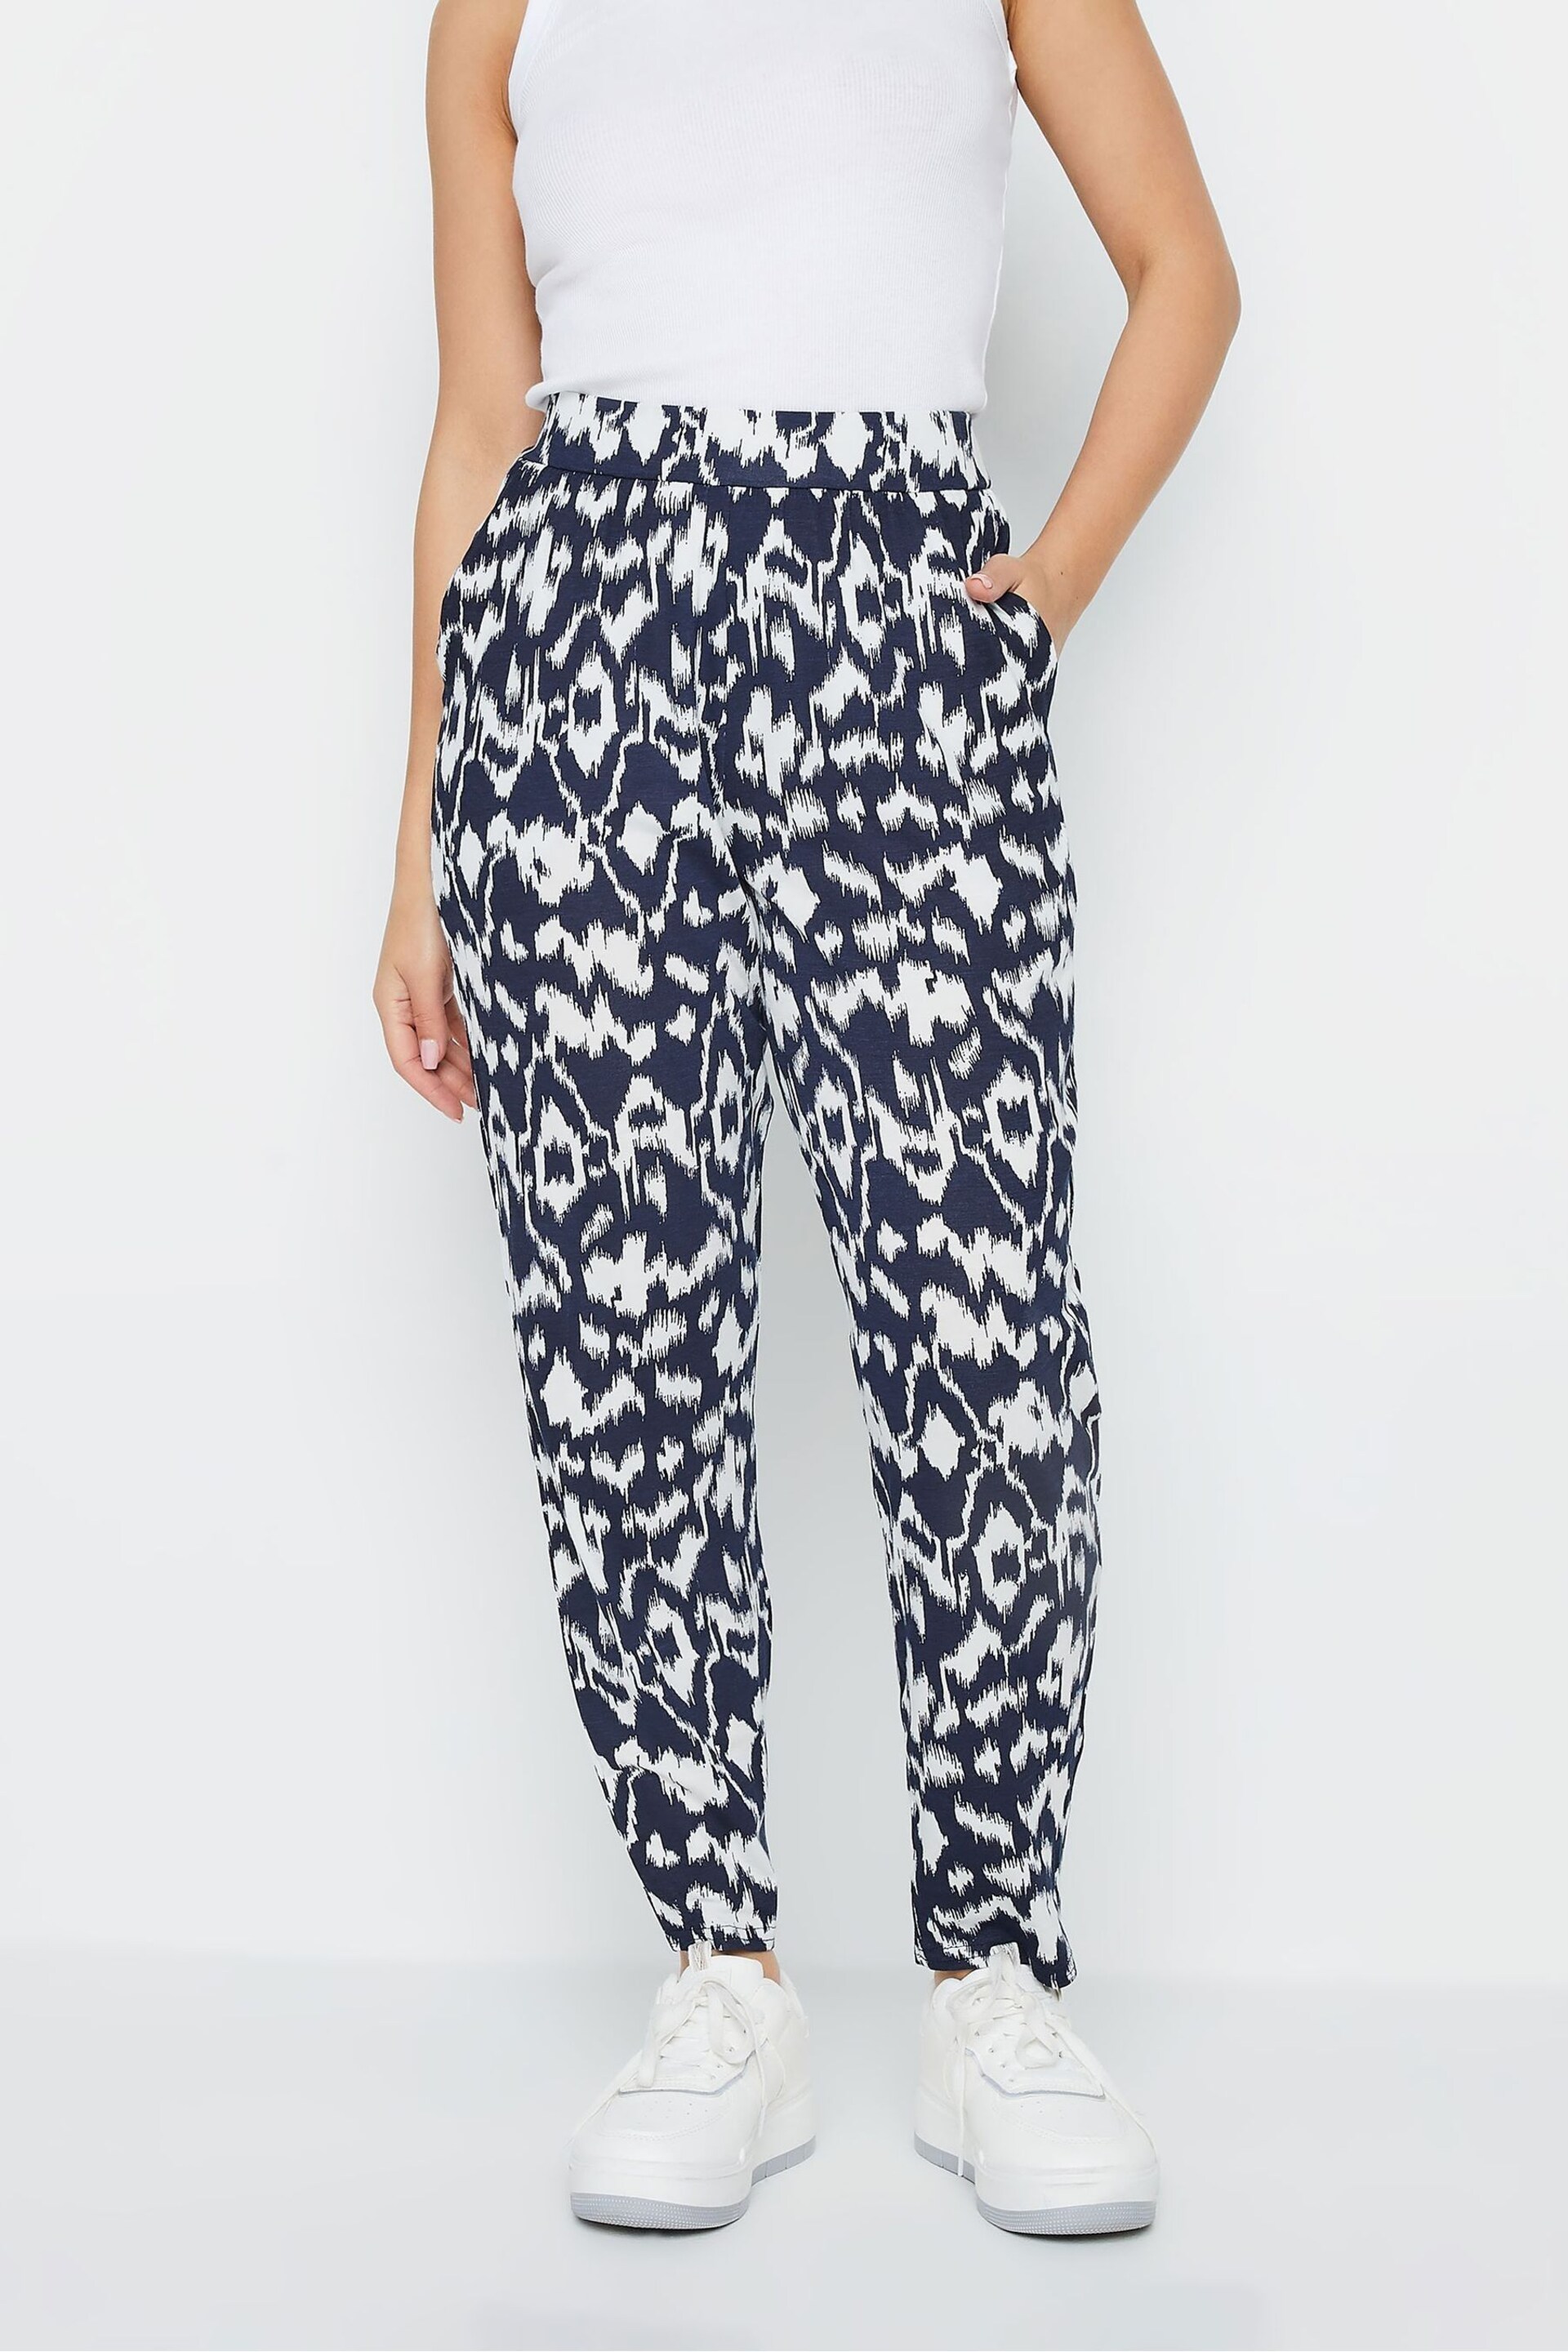 PixieGirl Petite Blue Abstract Harem Trousers - Image 1 of 5